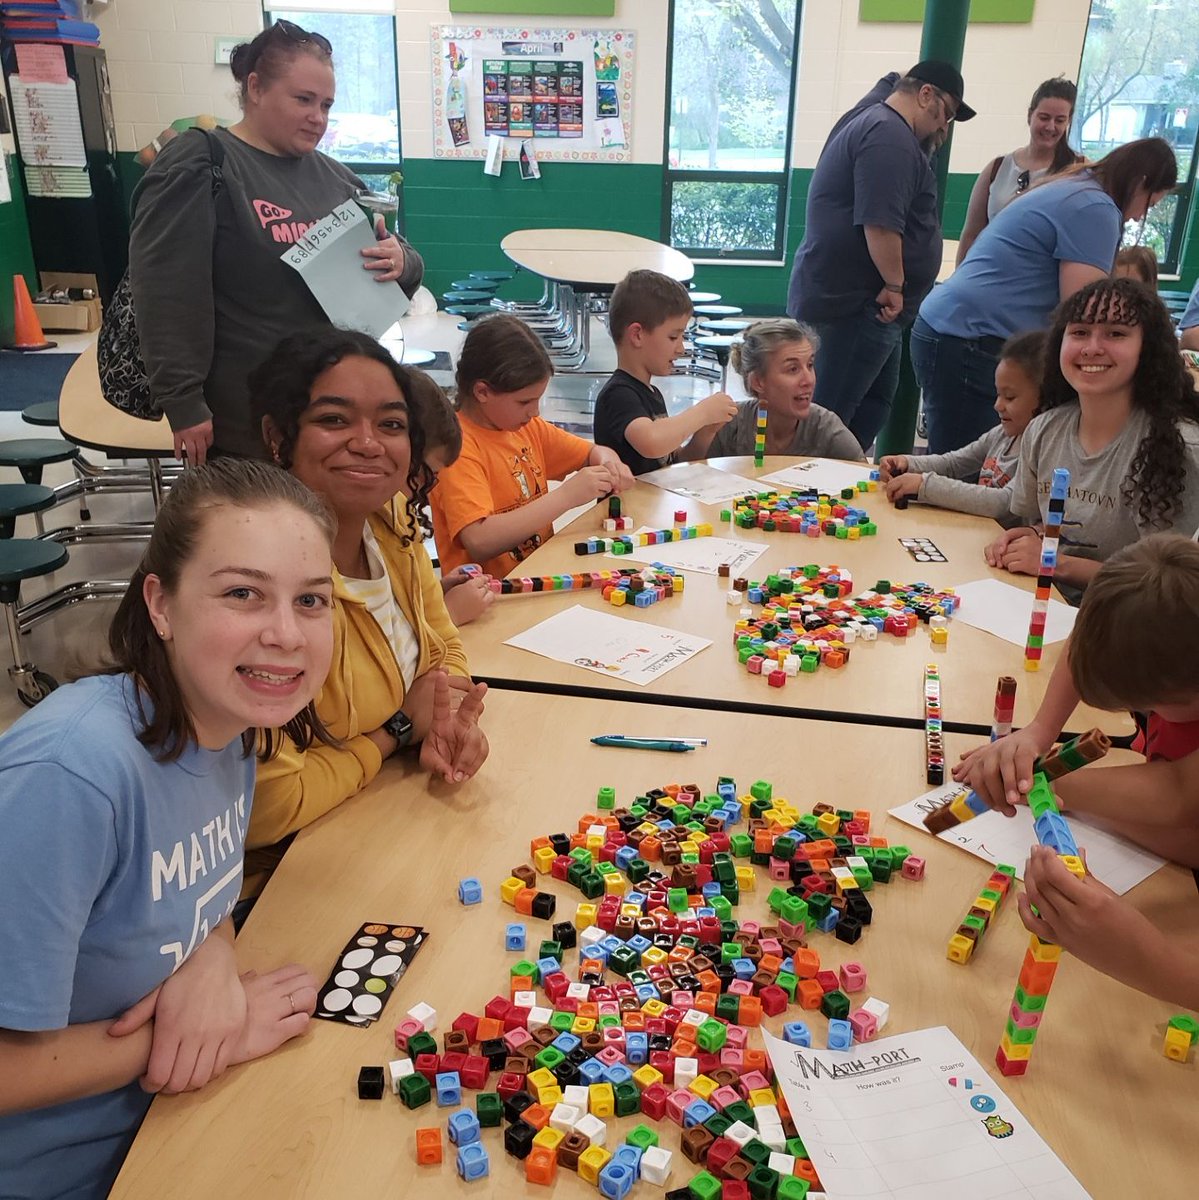 On Wednesday night Greenfield High School Mu Alpha Theta (Math National Honor Society) held a Math Night for the elementary schools, hosted at Elm Dale. There was Guess the Number of M&M's, Bingo, Shut the Box, and several other activities! #hustlinhawks #hawksflyhigh #math